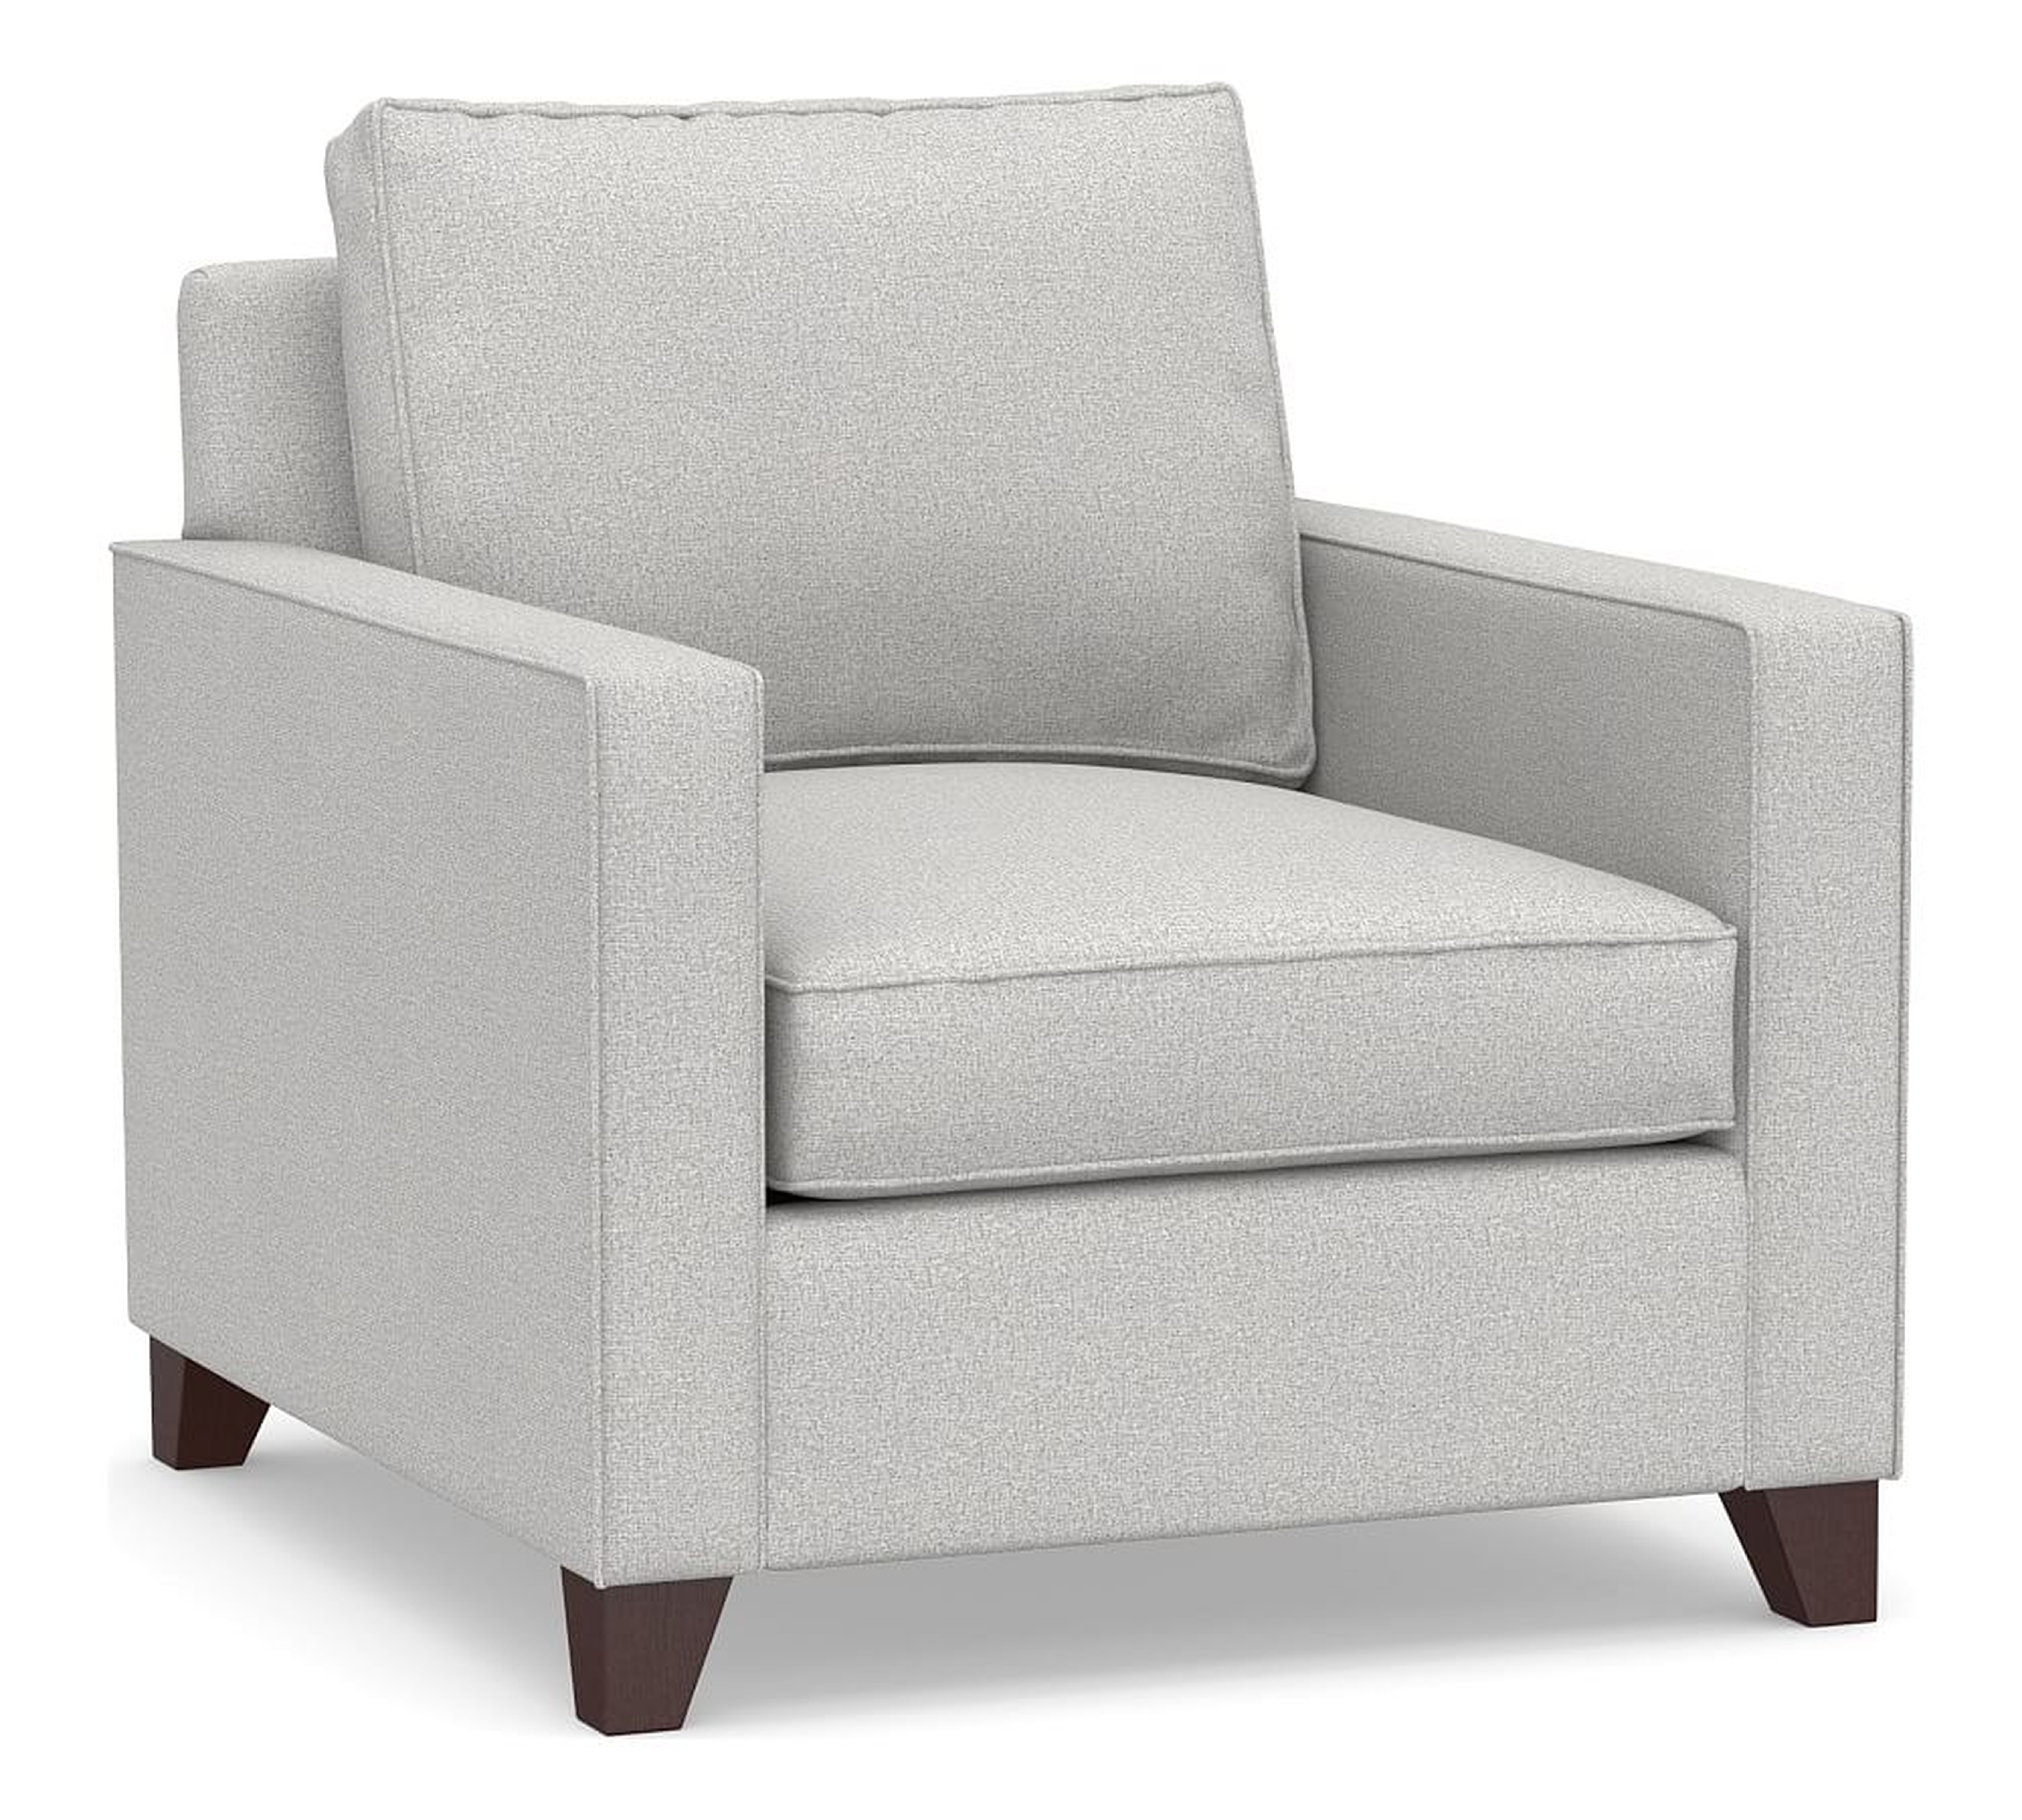 Cameron Square Arm Upholstered Deep Seat Armchair, Polyester Wrapped Cushions, Park Weave Ash - Pottery Barn